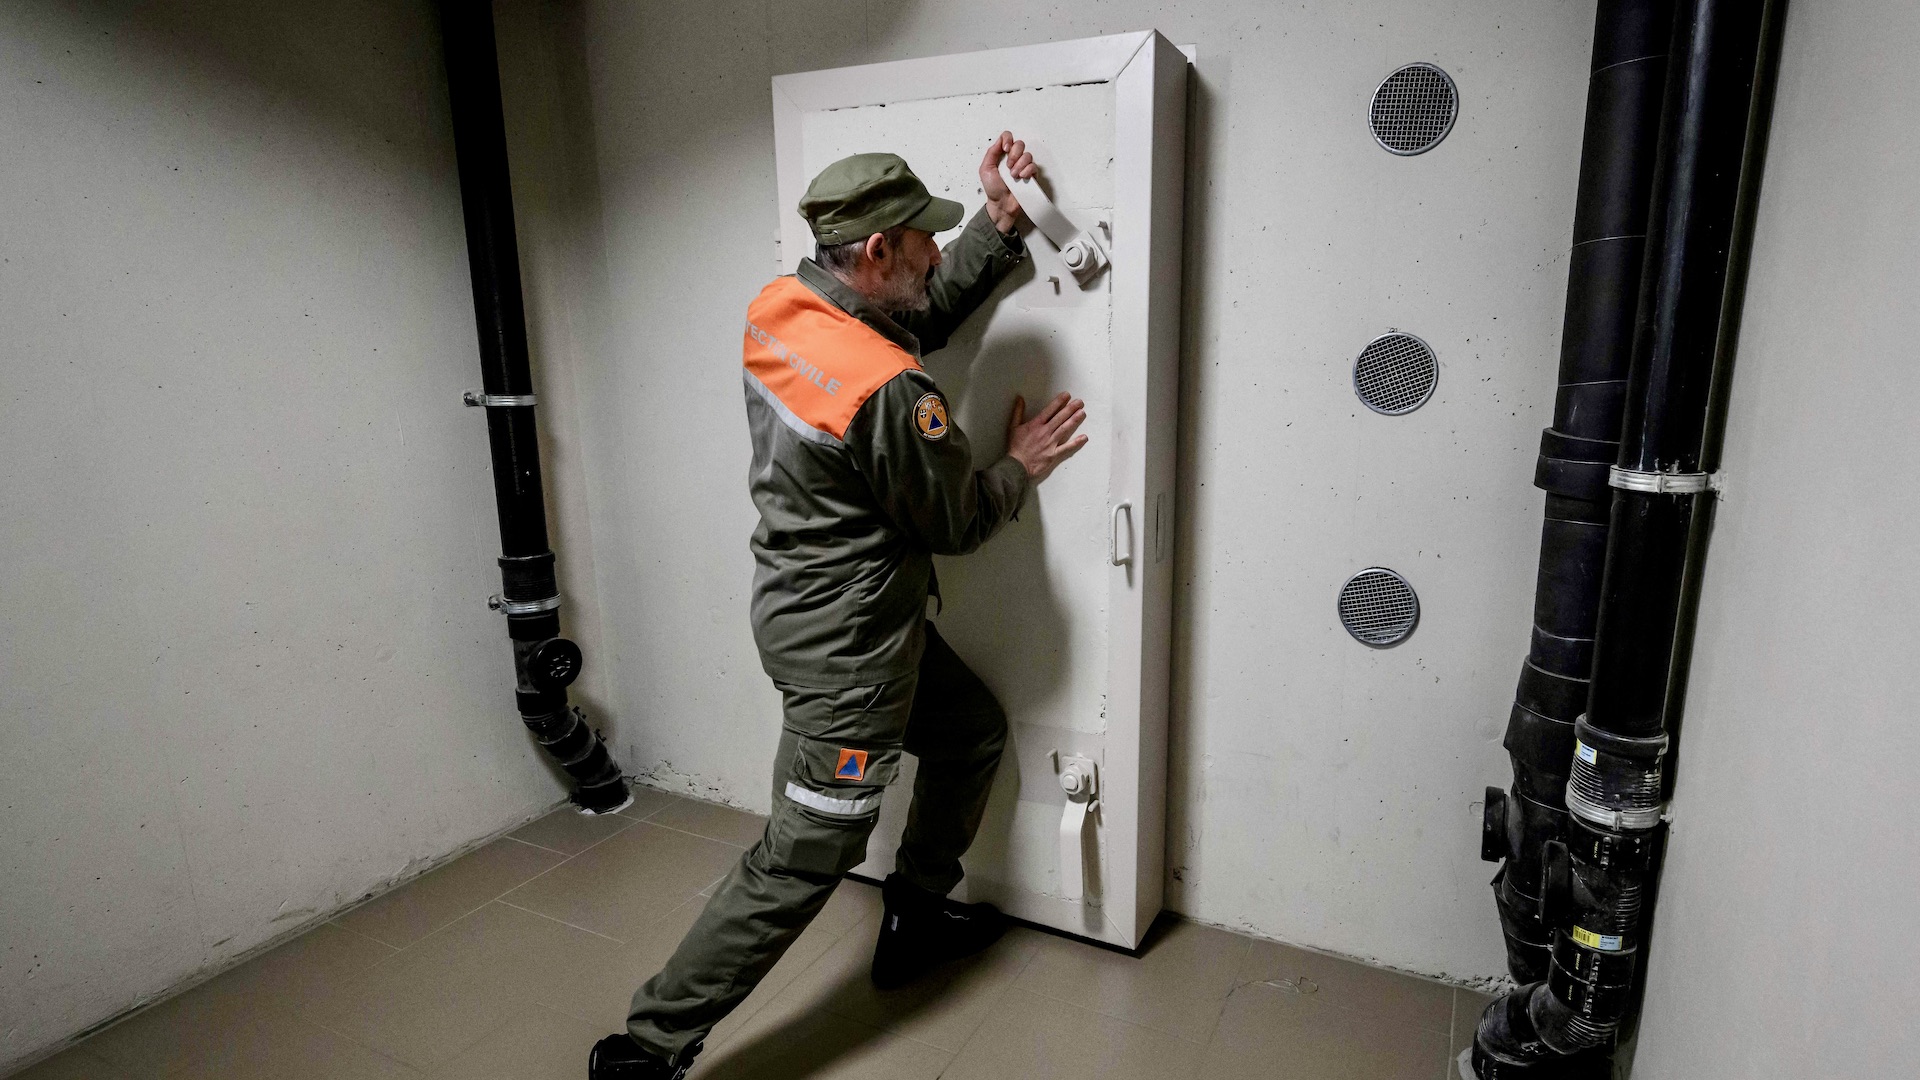 An officer of the Swiss Civil defence of the canton of Geneva closes the door of a private concrete nuclear fallout shelter located underneath a residential building in the city of Meyrin near Geneva on March 25, 2022. - Russia's invasion of Ukraine has awakened long-slumbering anxiety interest in Switzerland in concrete nuclear fallout shelters built across the country during the Cold War, with spots available for every single resident. (Photo by Fabrice COFFRINI / AFP) (Photo by FABRICE COFFRINI/AFP via Getty Images)